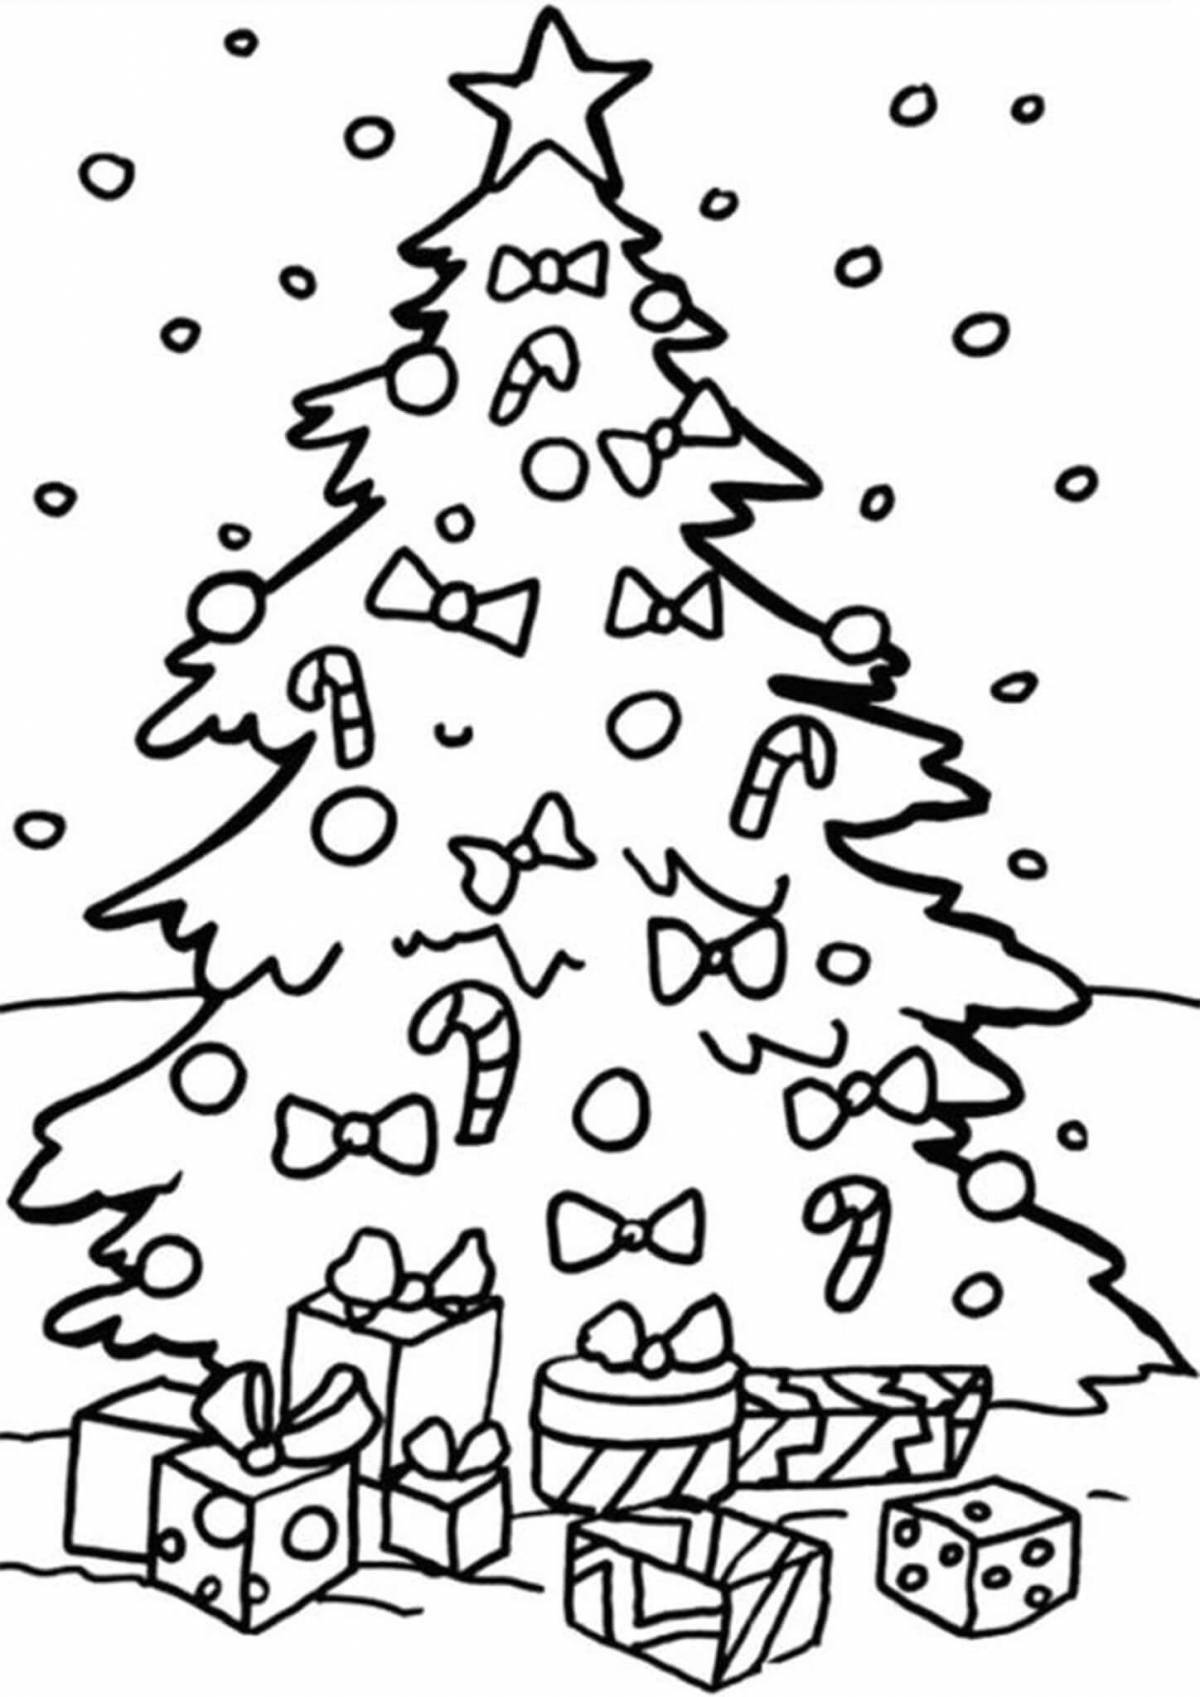 Glitter winter tree coloring page